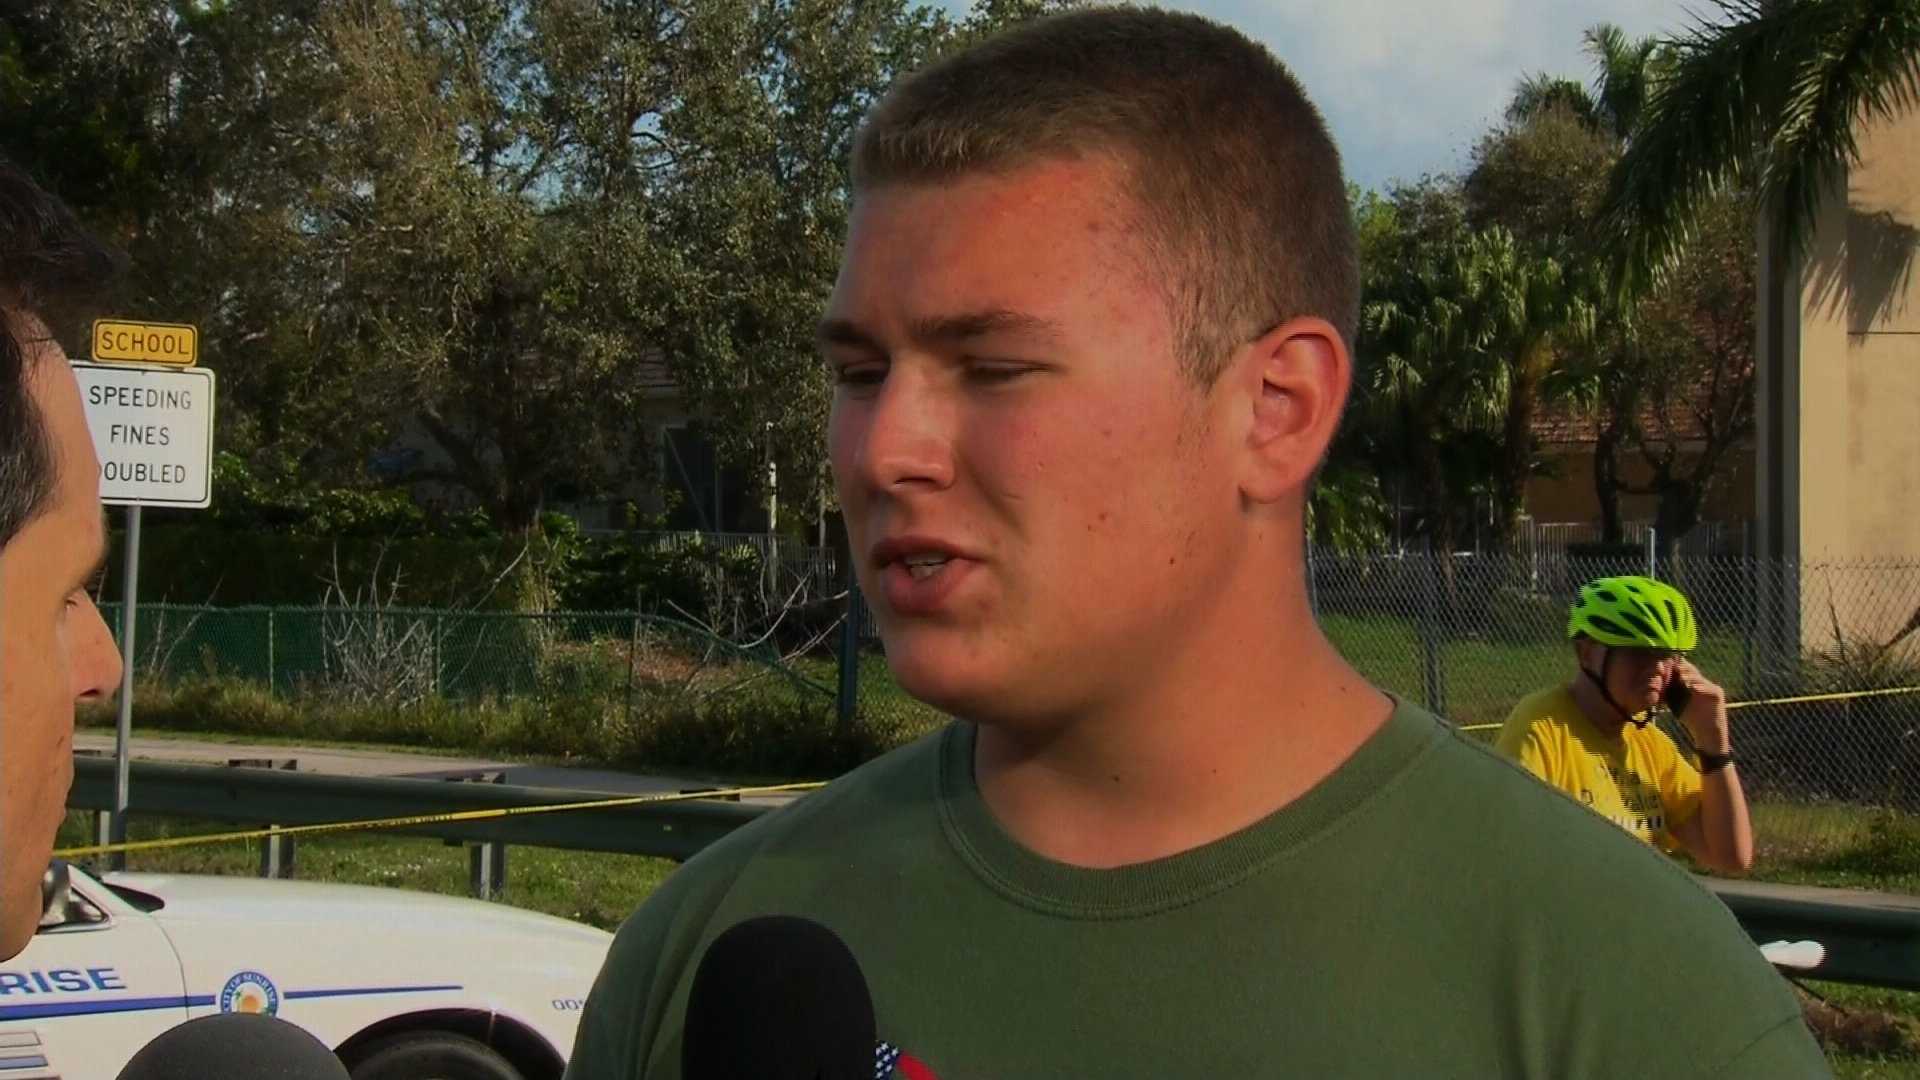 Junior ROTC student helped shield dozens with Kevlar sheets in Florida school shooting